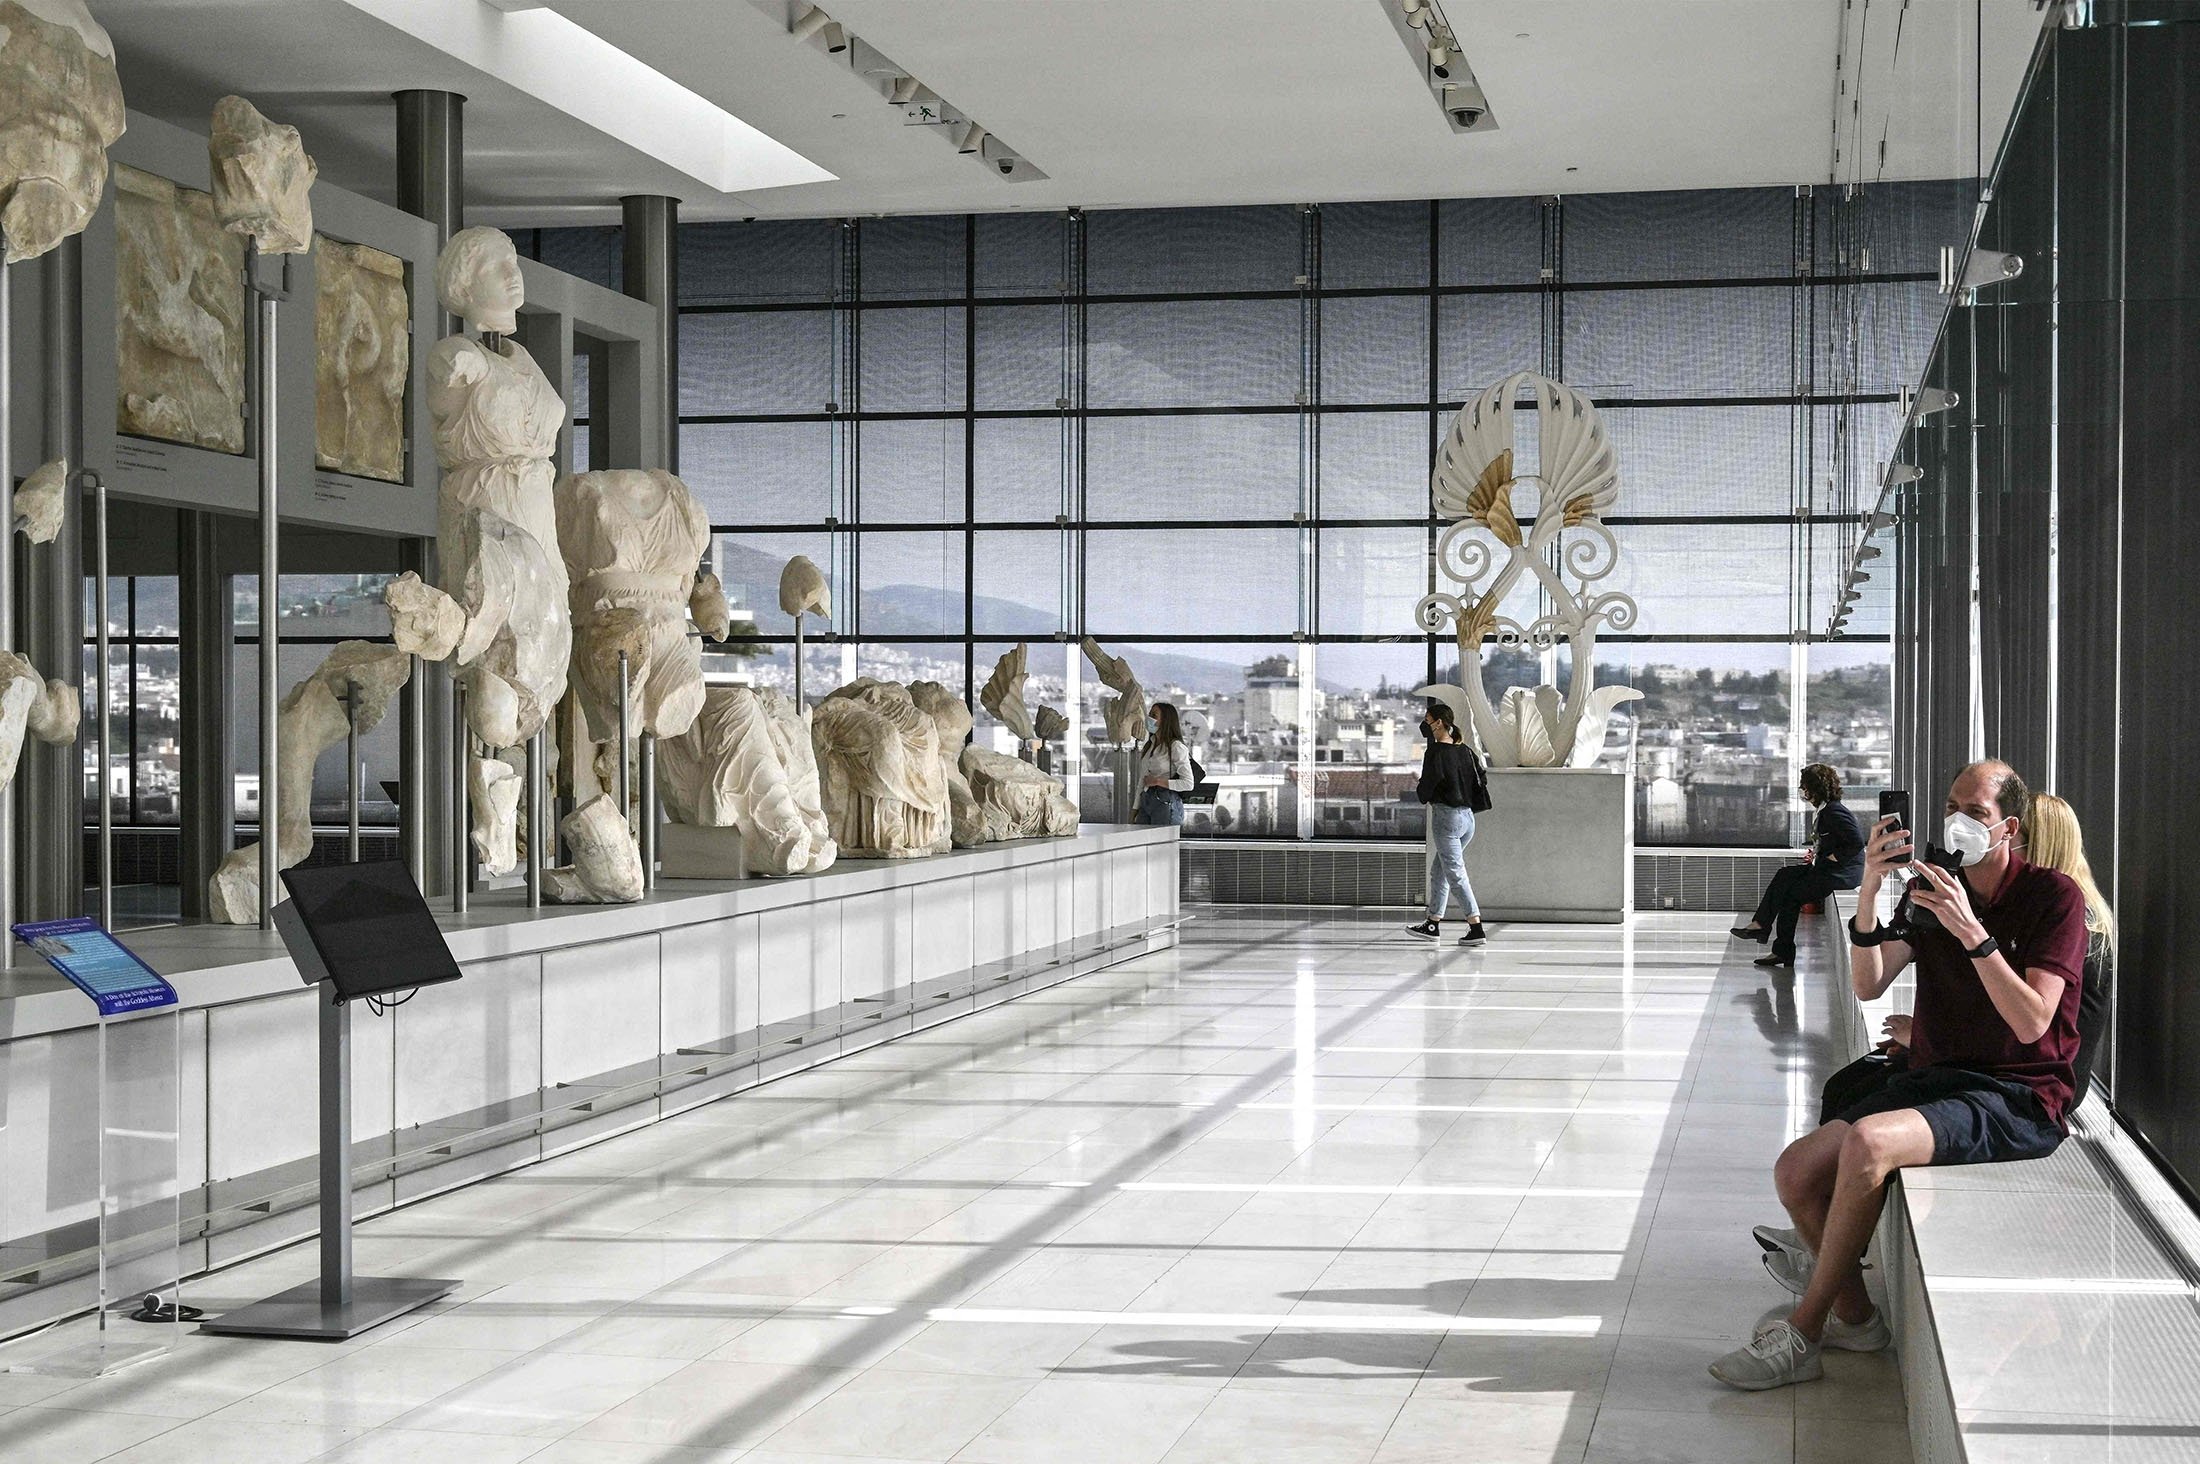 Visitors walk in the "Parthenon gallery" of the Acropolis museum in Athens, Greece, April 6, 2022. (AFP Photo)